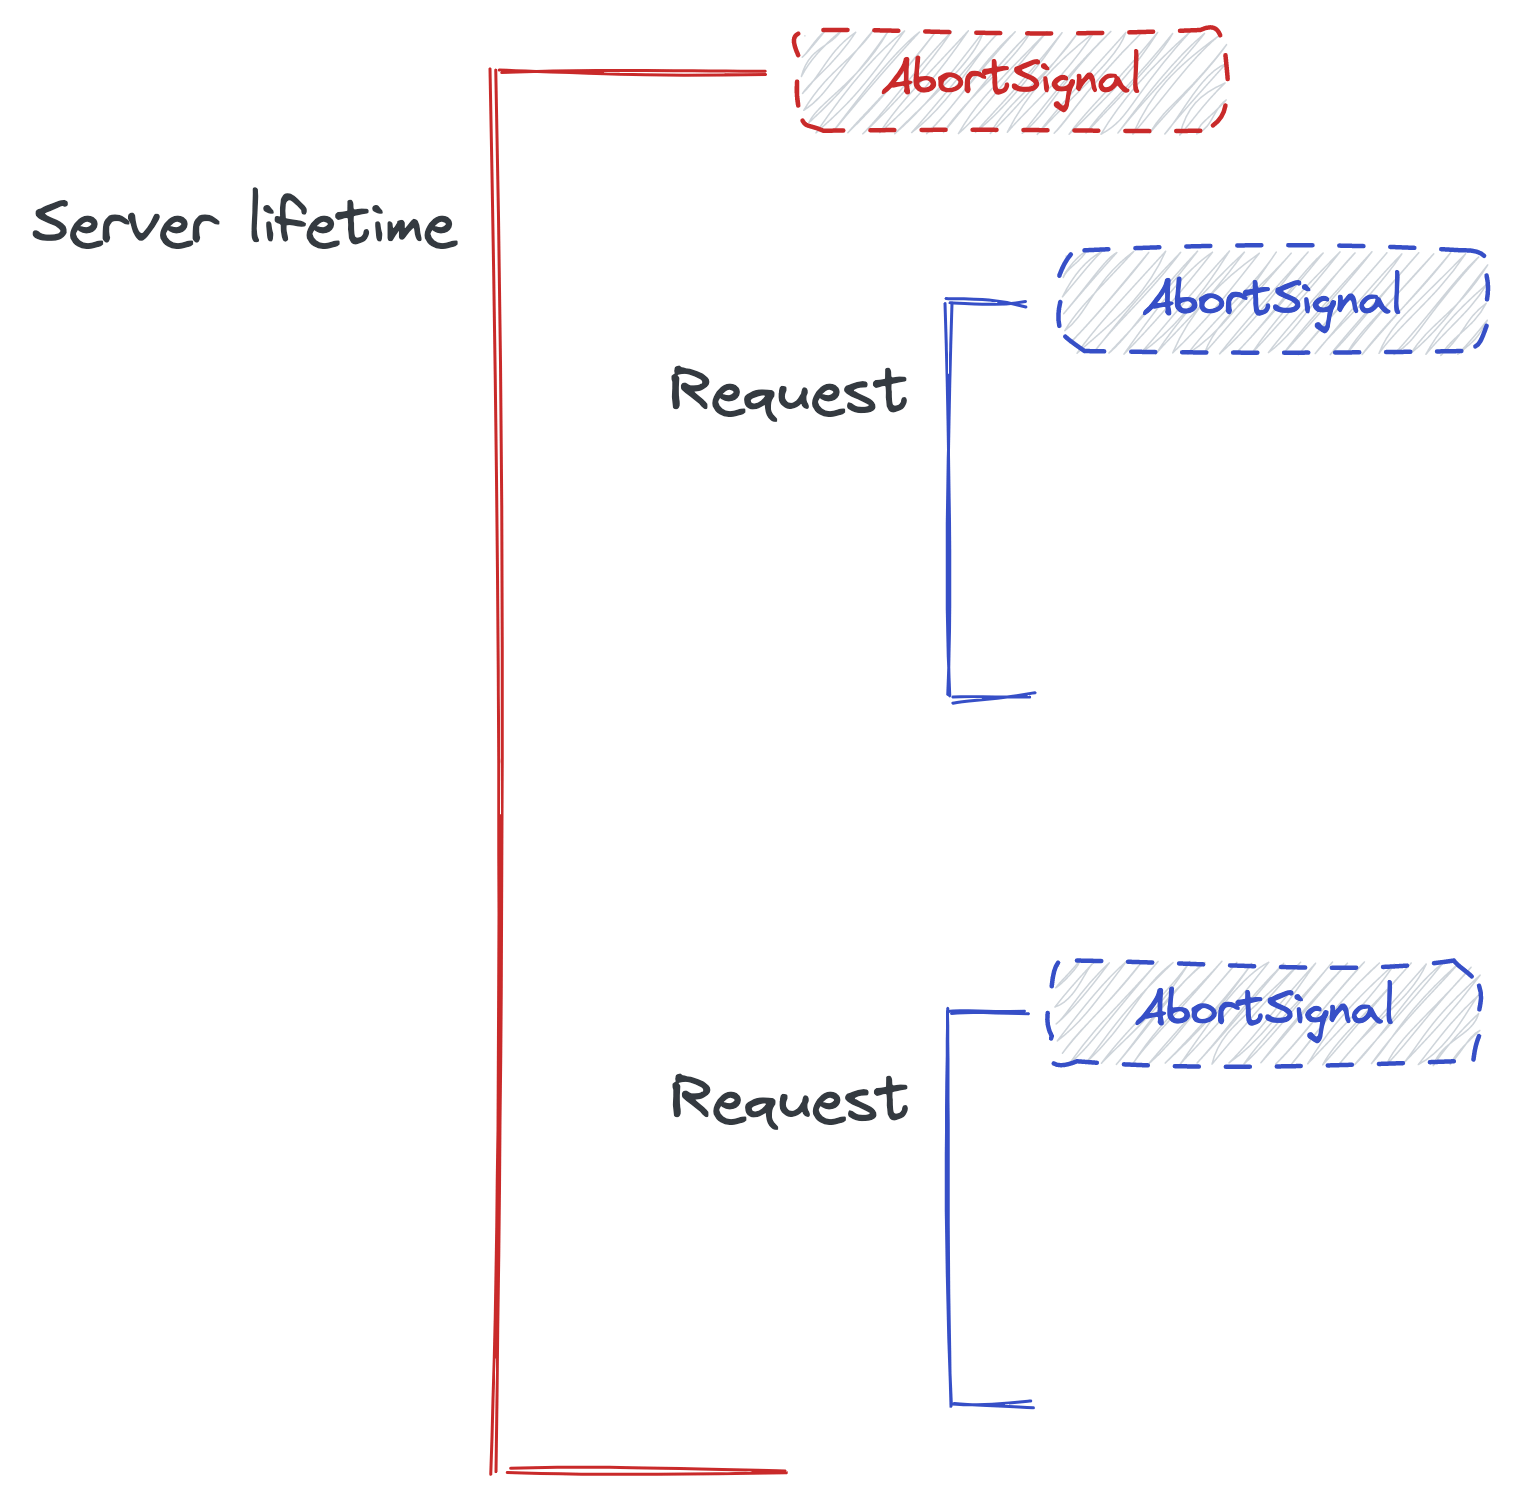 Shows a diagram of requests living within the total lifetime of a server